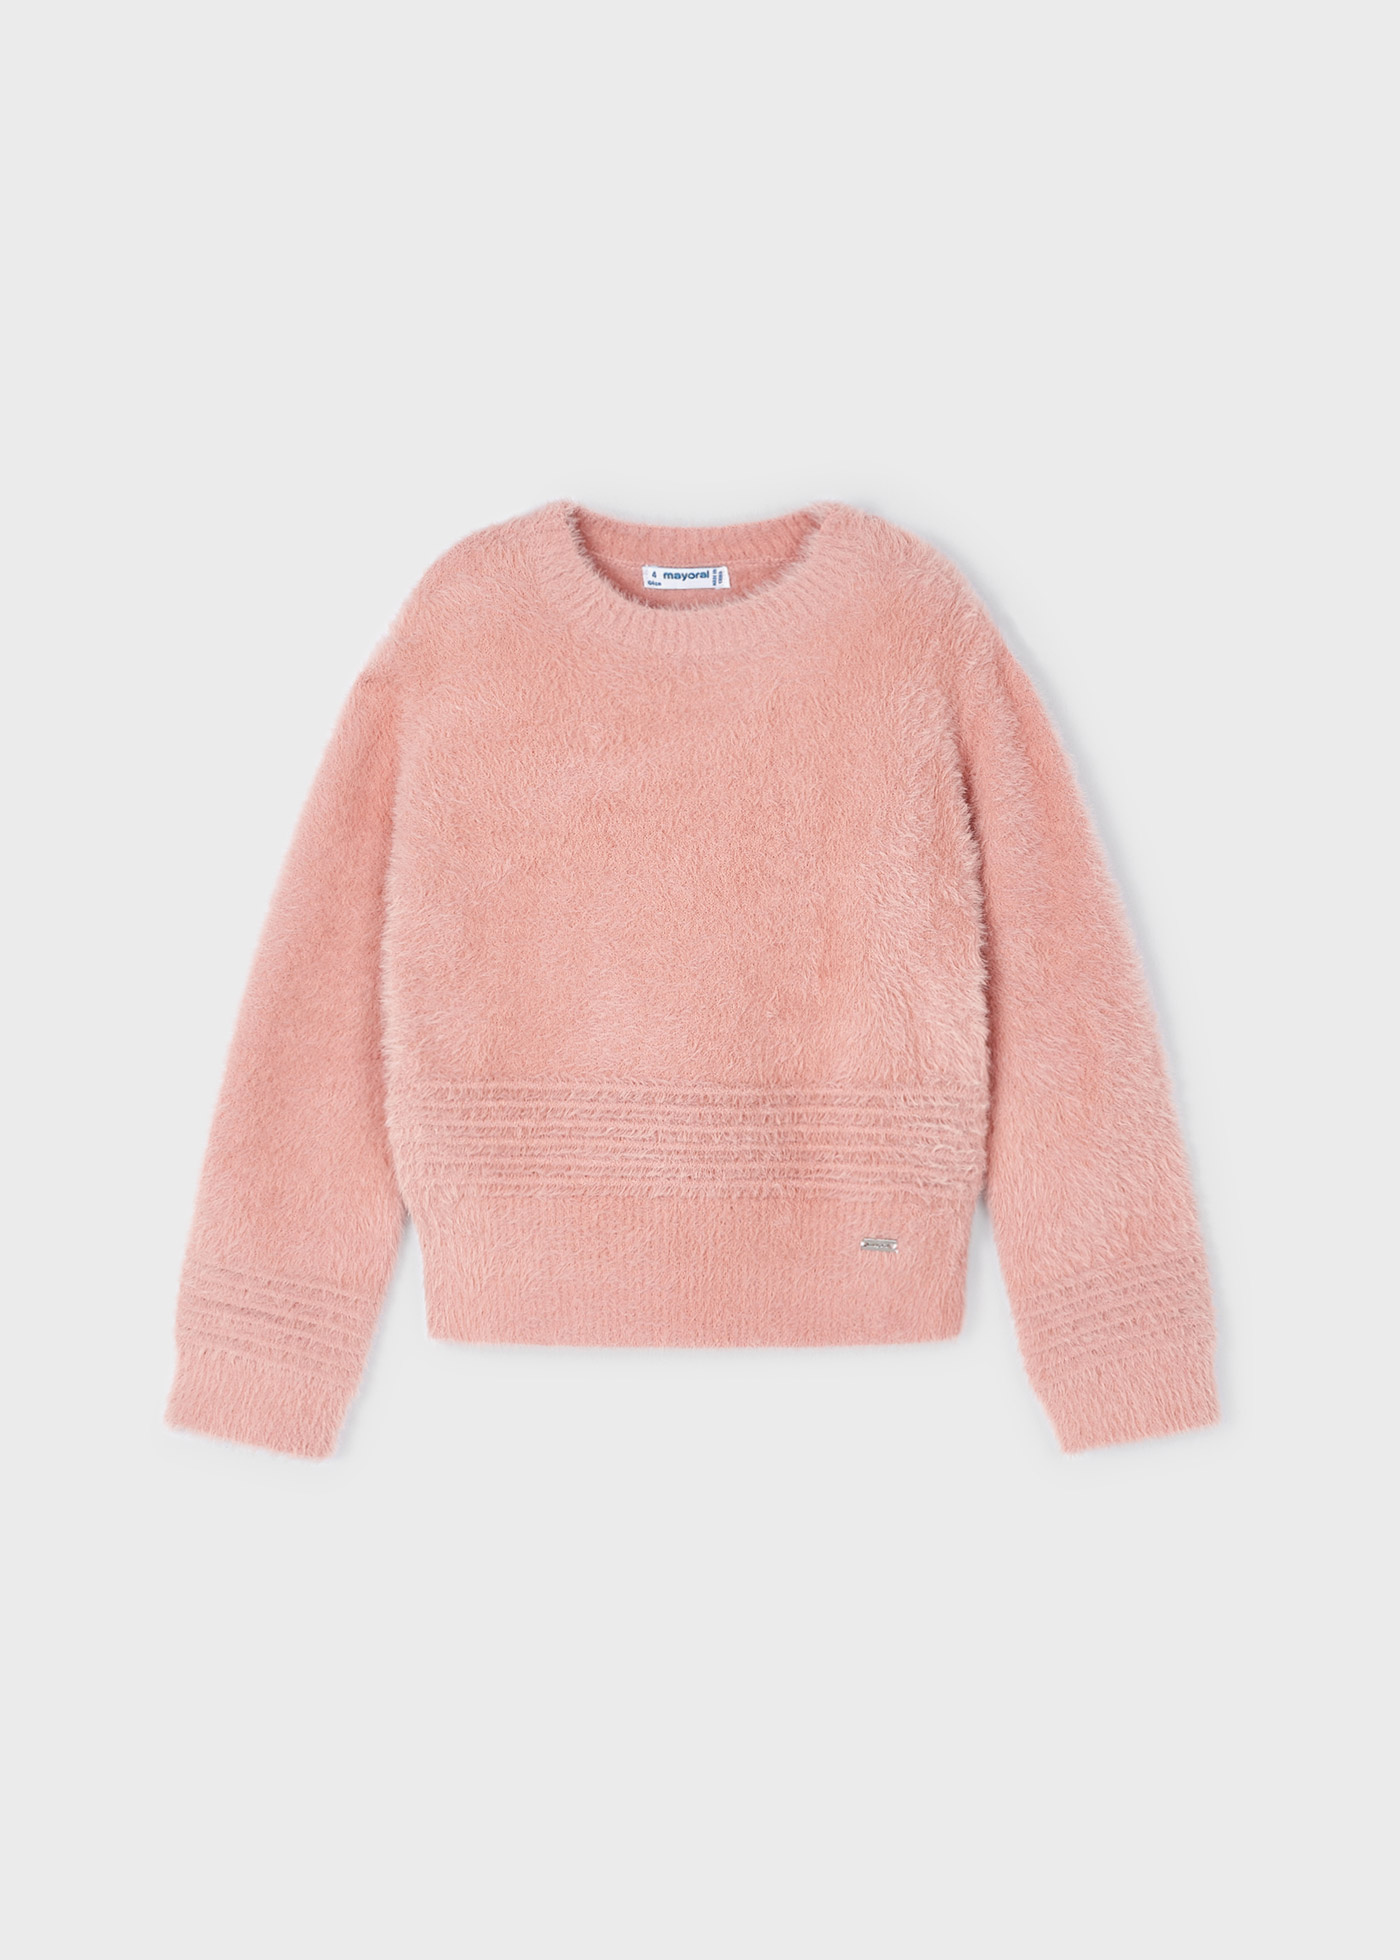 Faux fur knit sweater girl | Mayoral ®